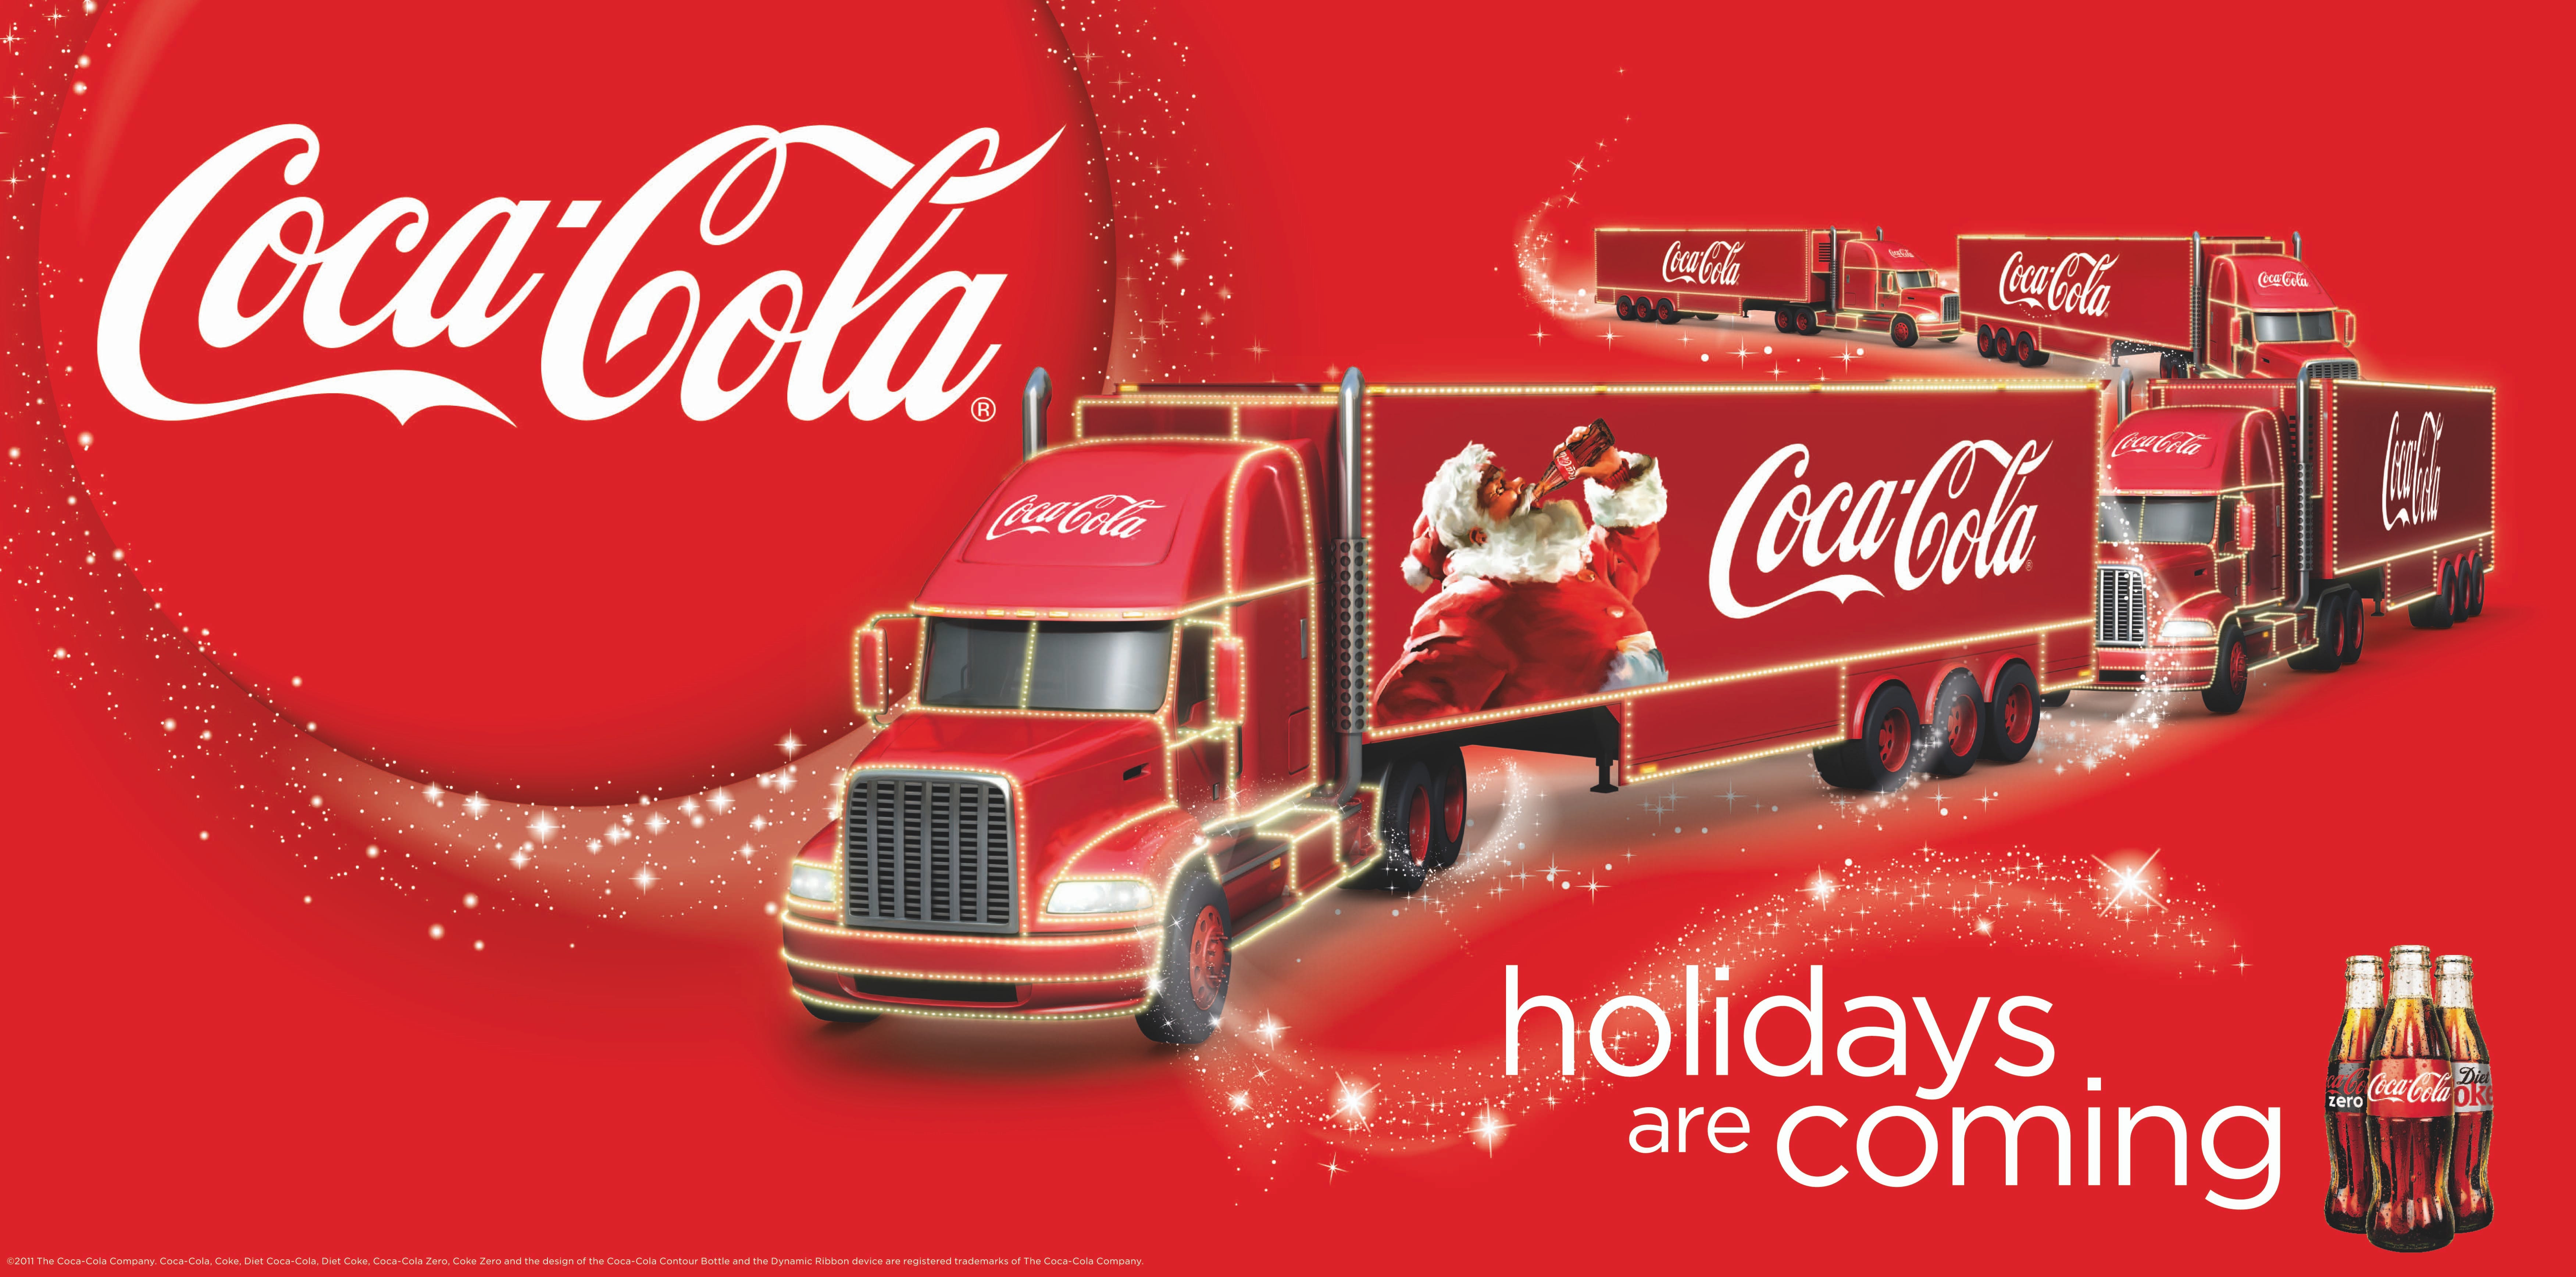 coca cola christmas commercial 2020 Holidays Are Coming The Coca Cola Christmas Branding Story By Stewart Hodgson Medium coca cola christmas commercial 2020